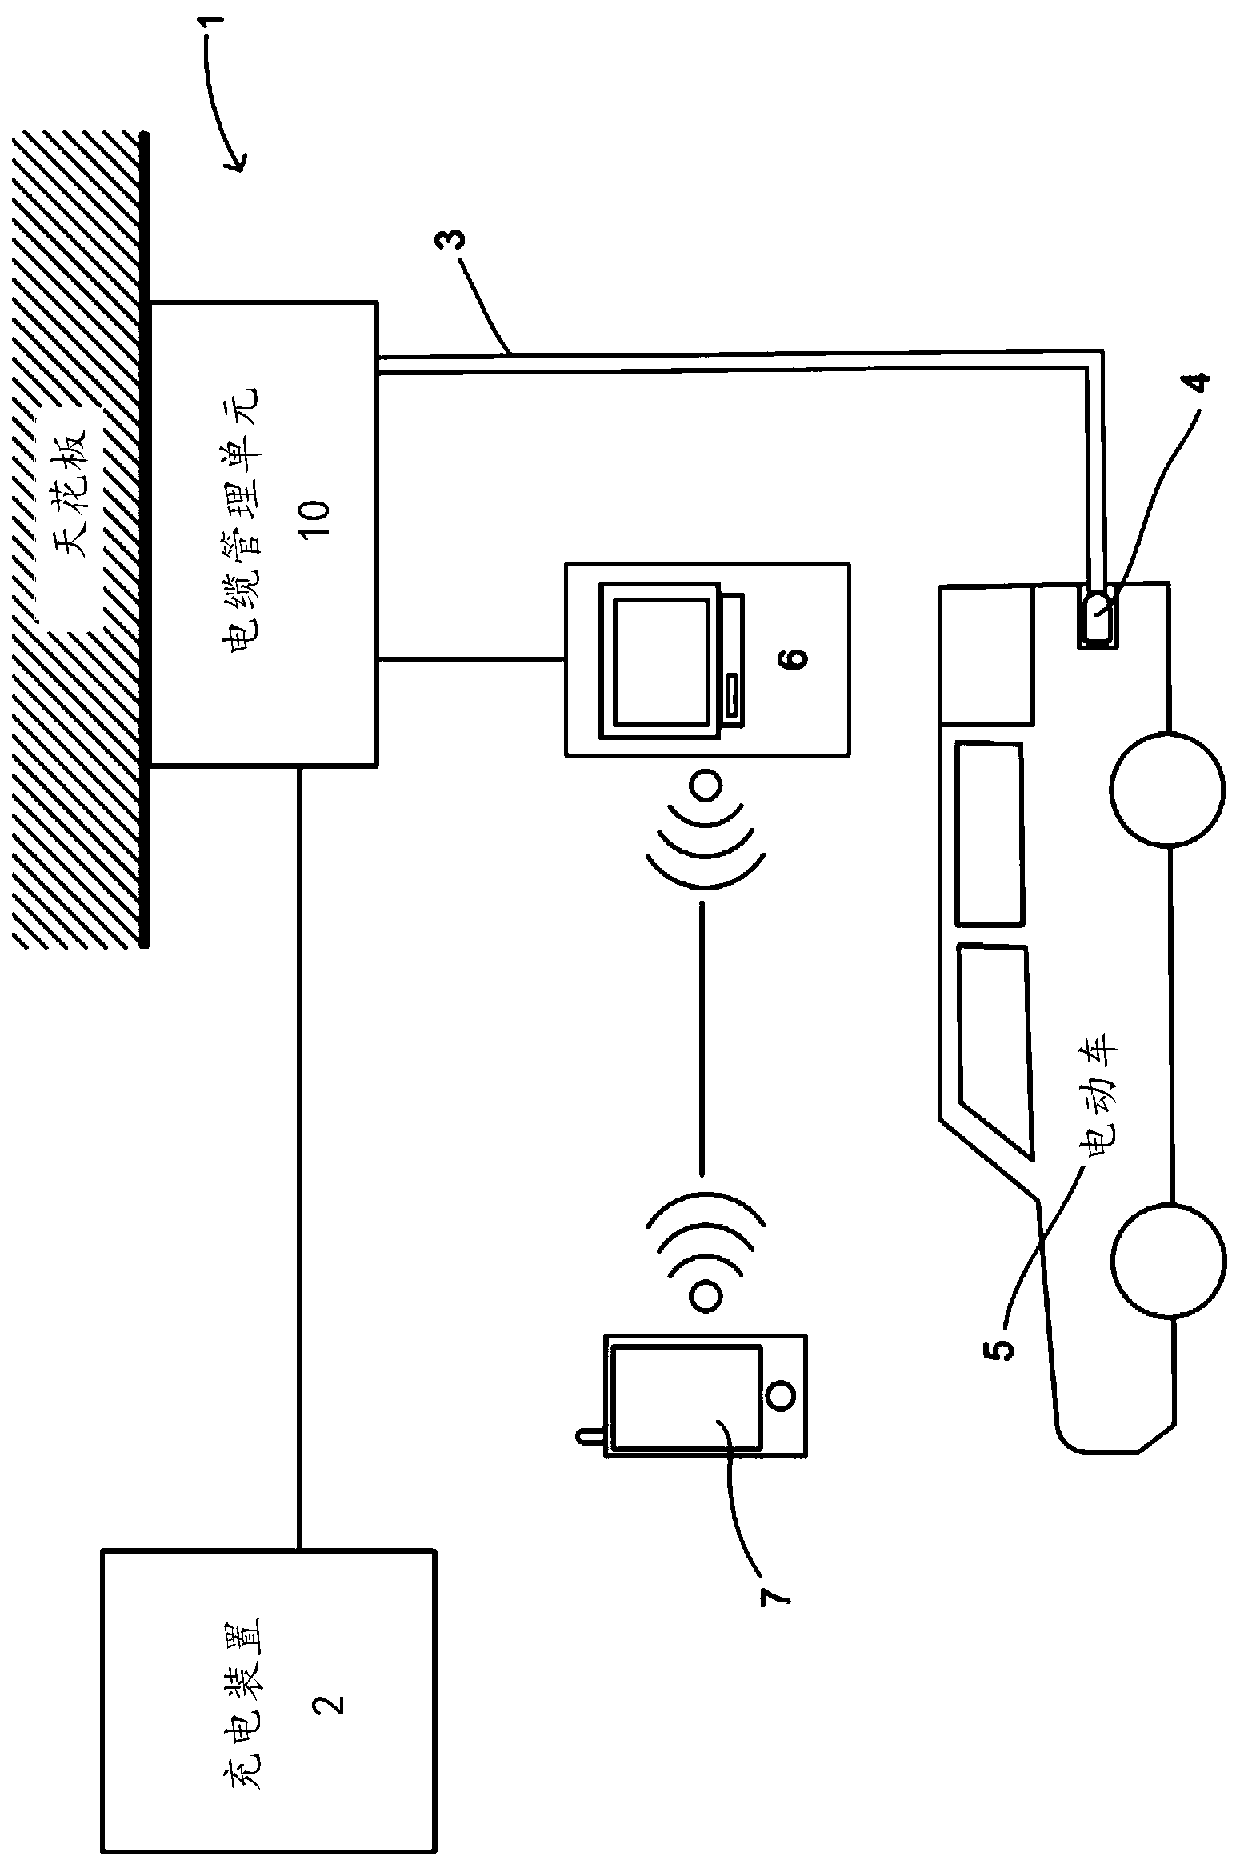 Overhead charging system with cable management unit